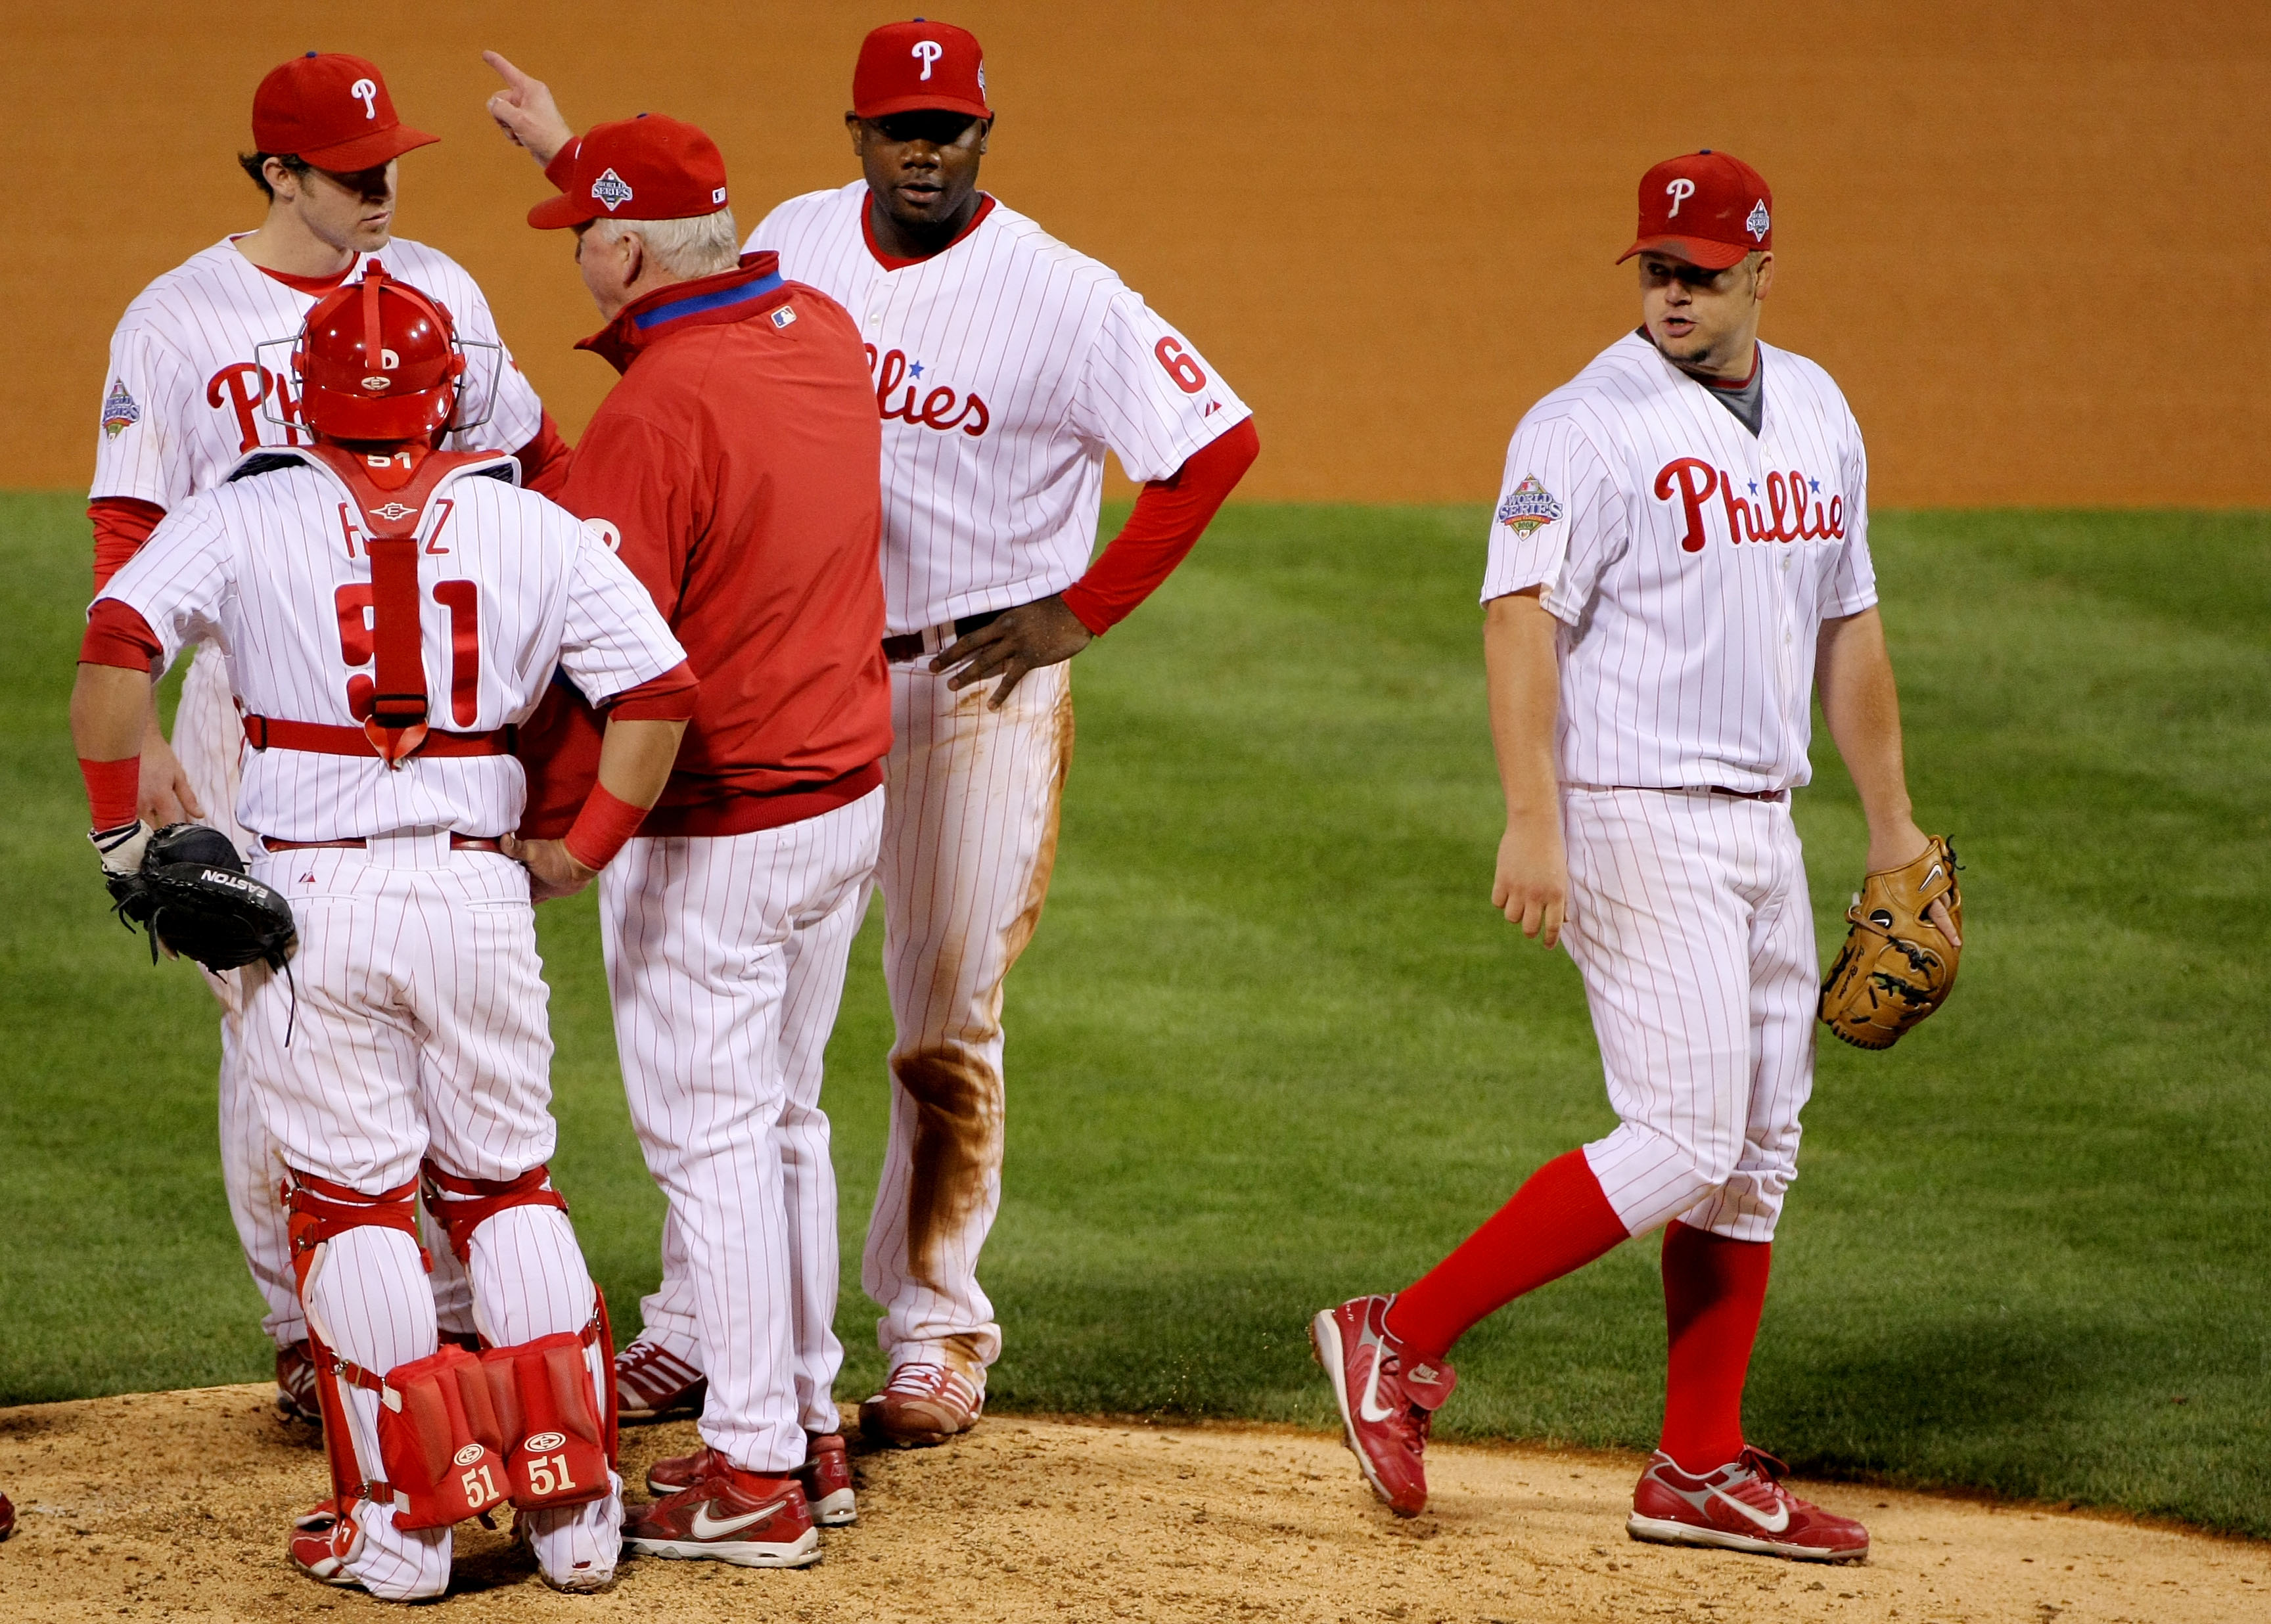 PHILADELPHIA - OCTOBER 26:  Joe Blanton #56 of the Philadelphia Phillies is pulled out of the game by manager Charlie Manuel while teammates Carlos Ruis #51, Chase Utley #26 and Ryan Howard #6 stand on the mound against the Tampa Bay Rays during game four